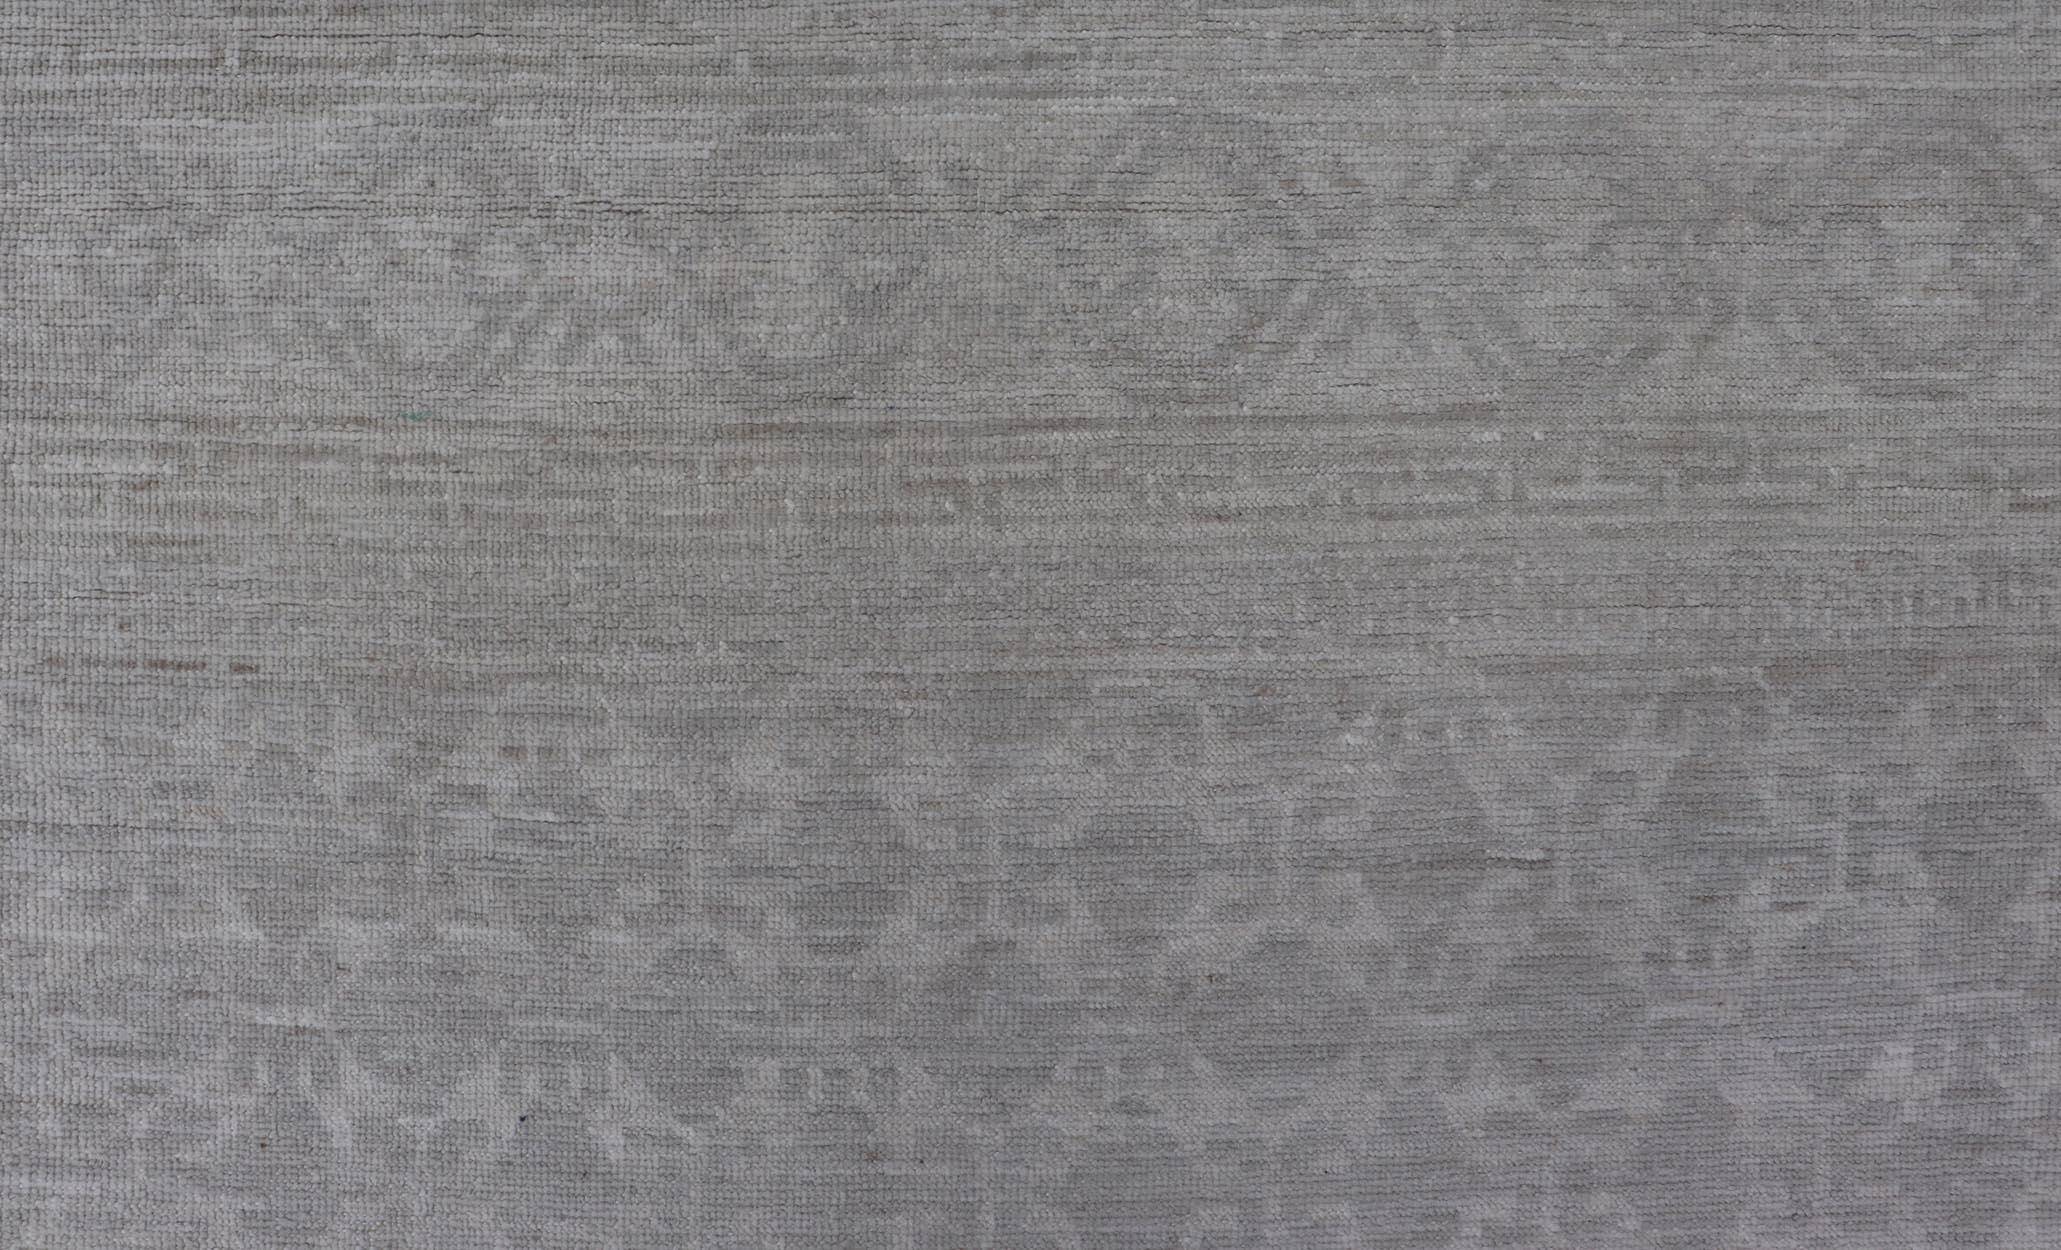 Contemporary Modern All-Over Tribal Motif Khotan Area Rug in Muted Gray and Cream Tones For Sale